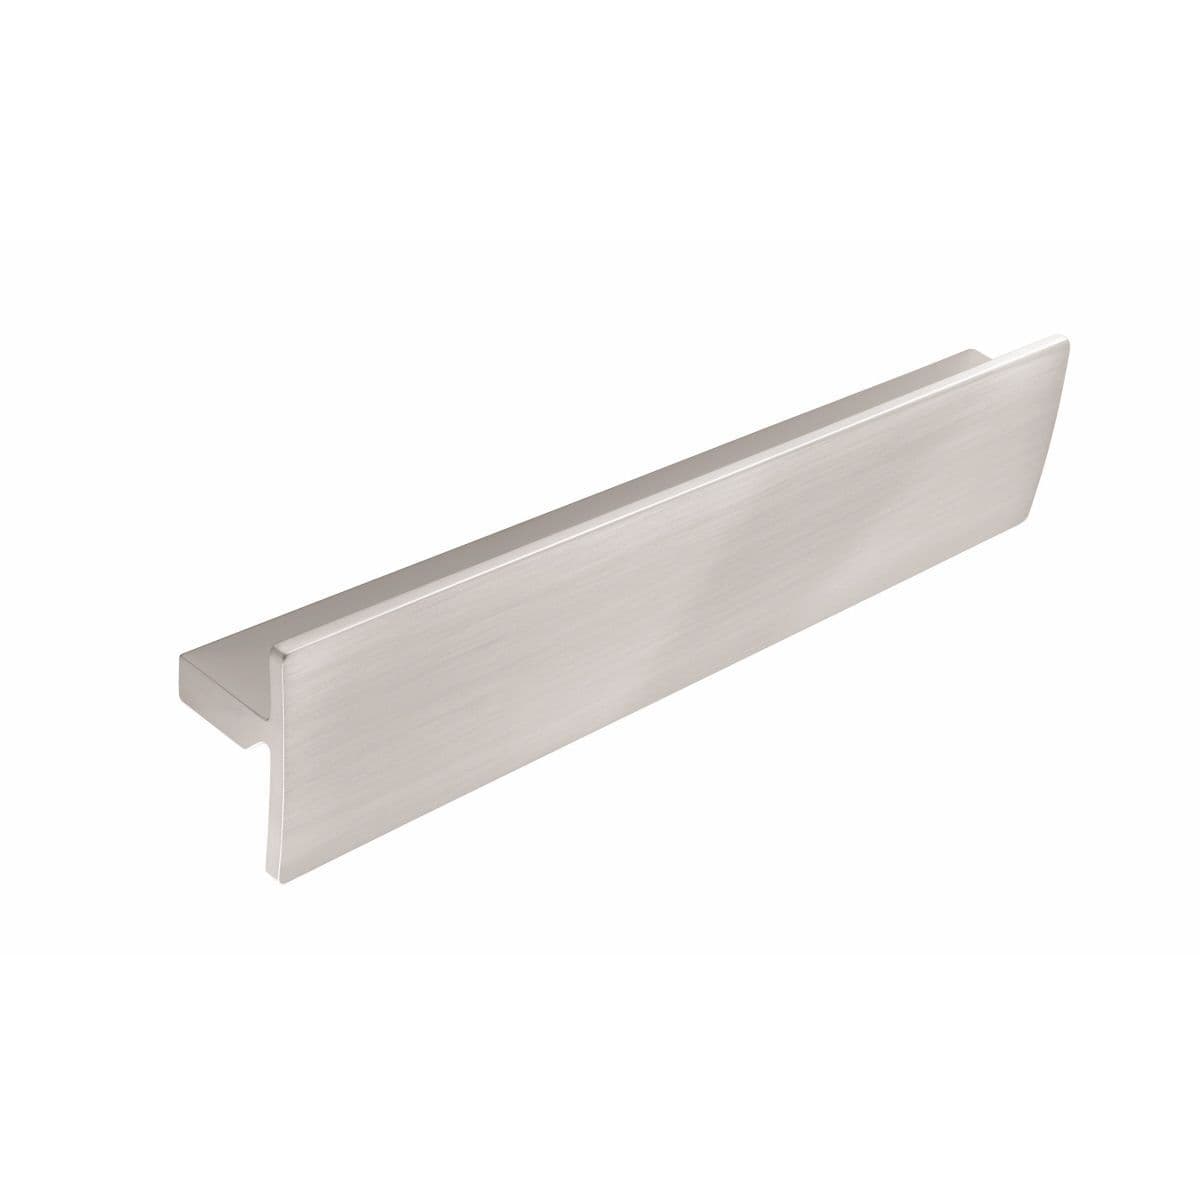 CLAPHAM TRIM Cupboard Handle - 160mm h/c size - BRUSHED S/STEEL EFFECT finish (PWS H732.160.SS)